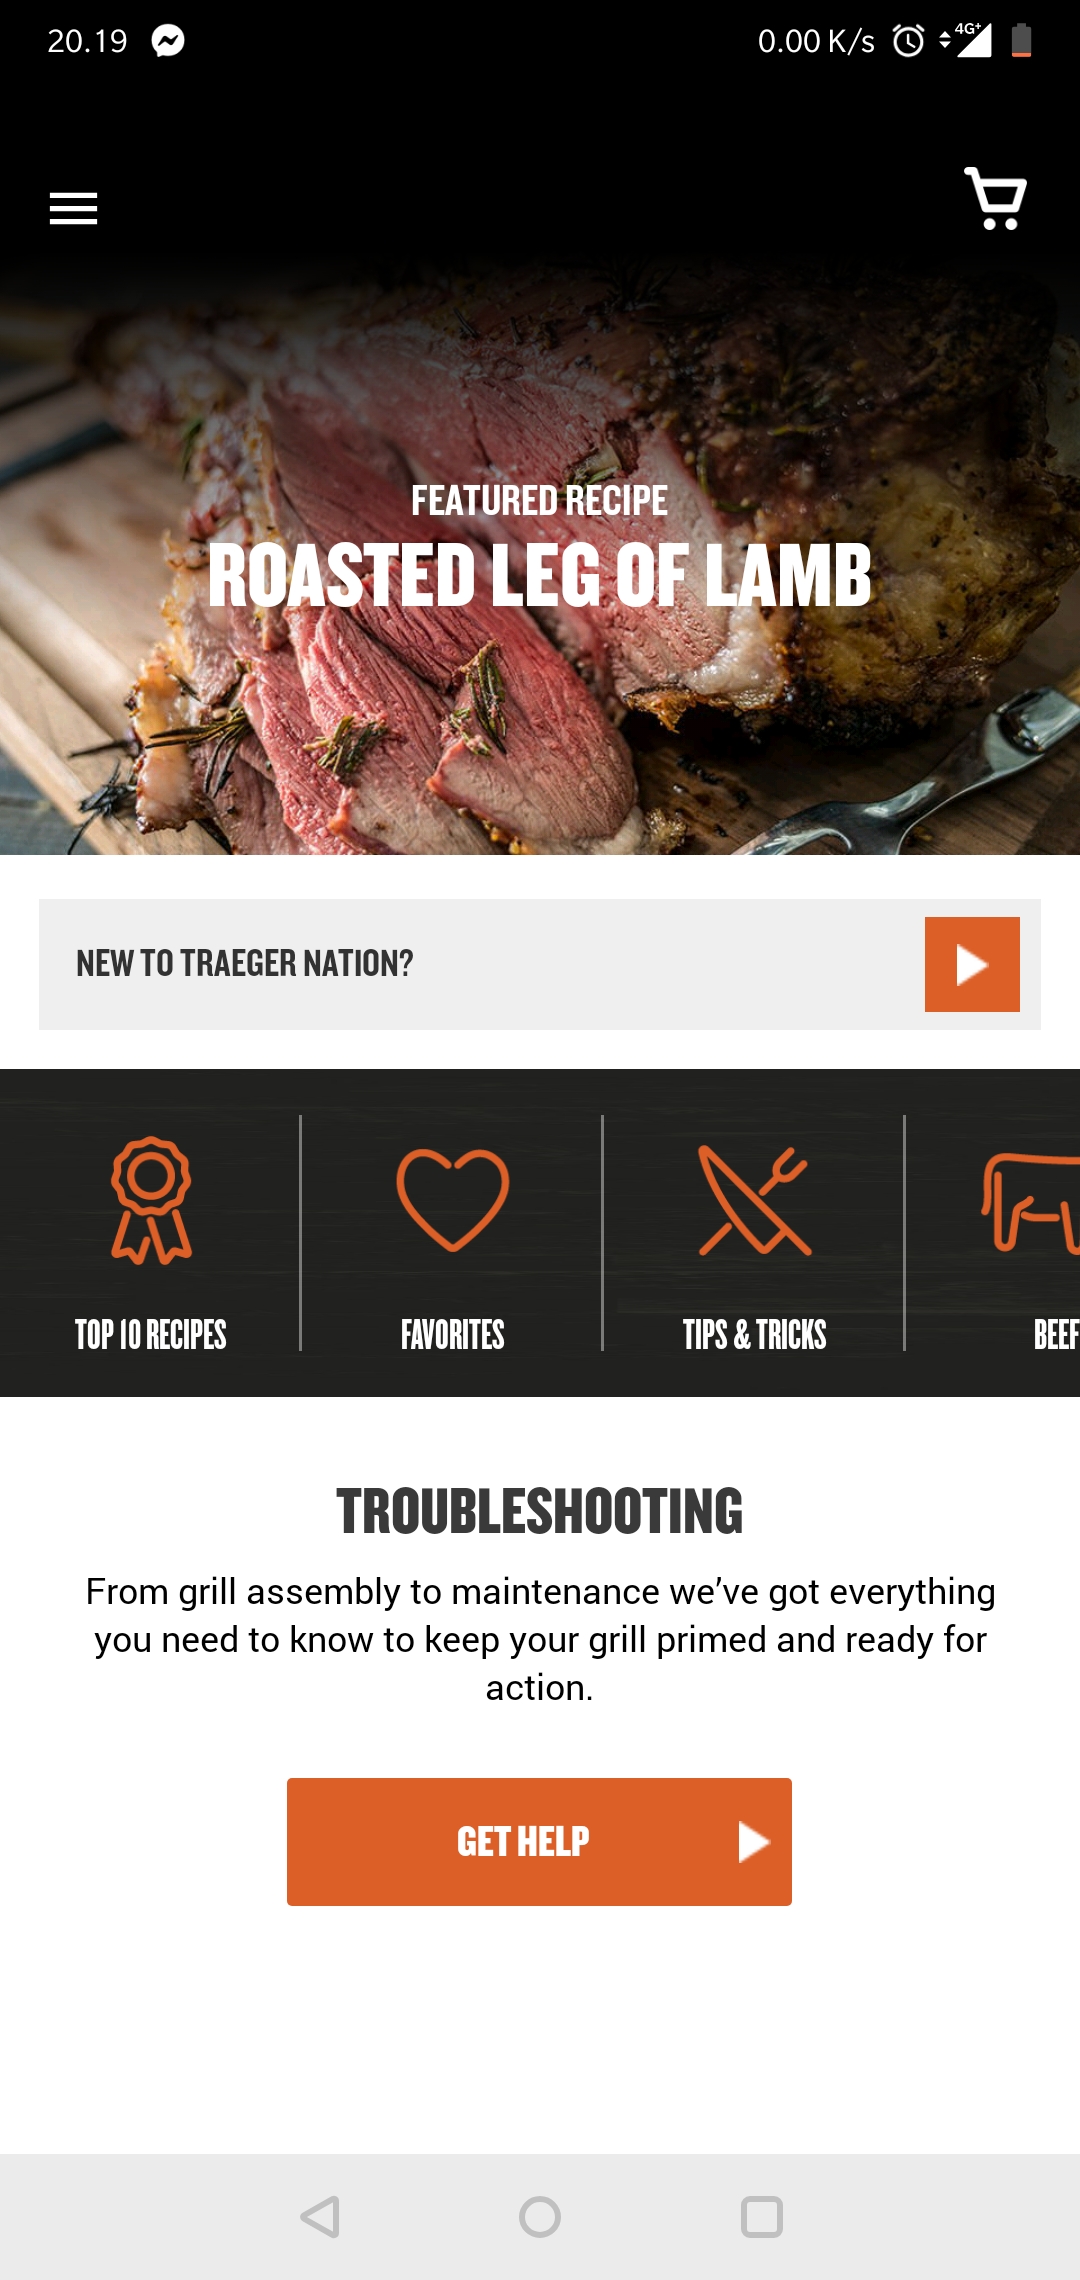 mobile app traeger grill